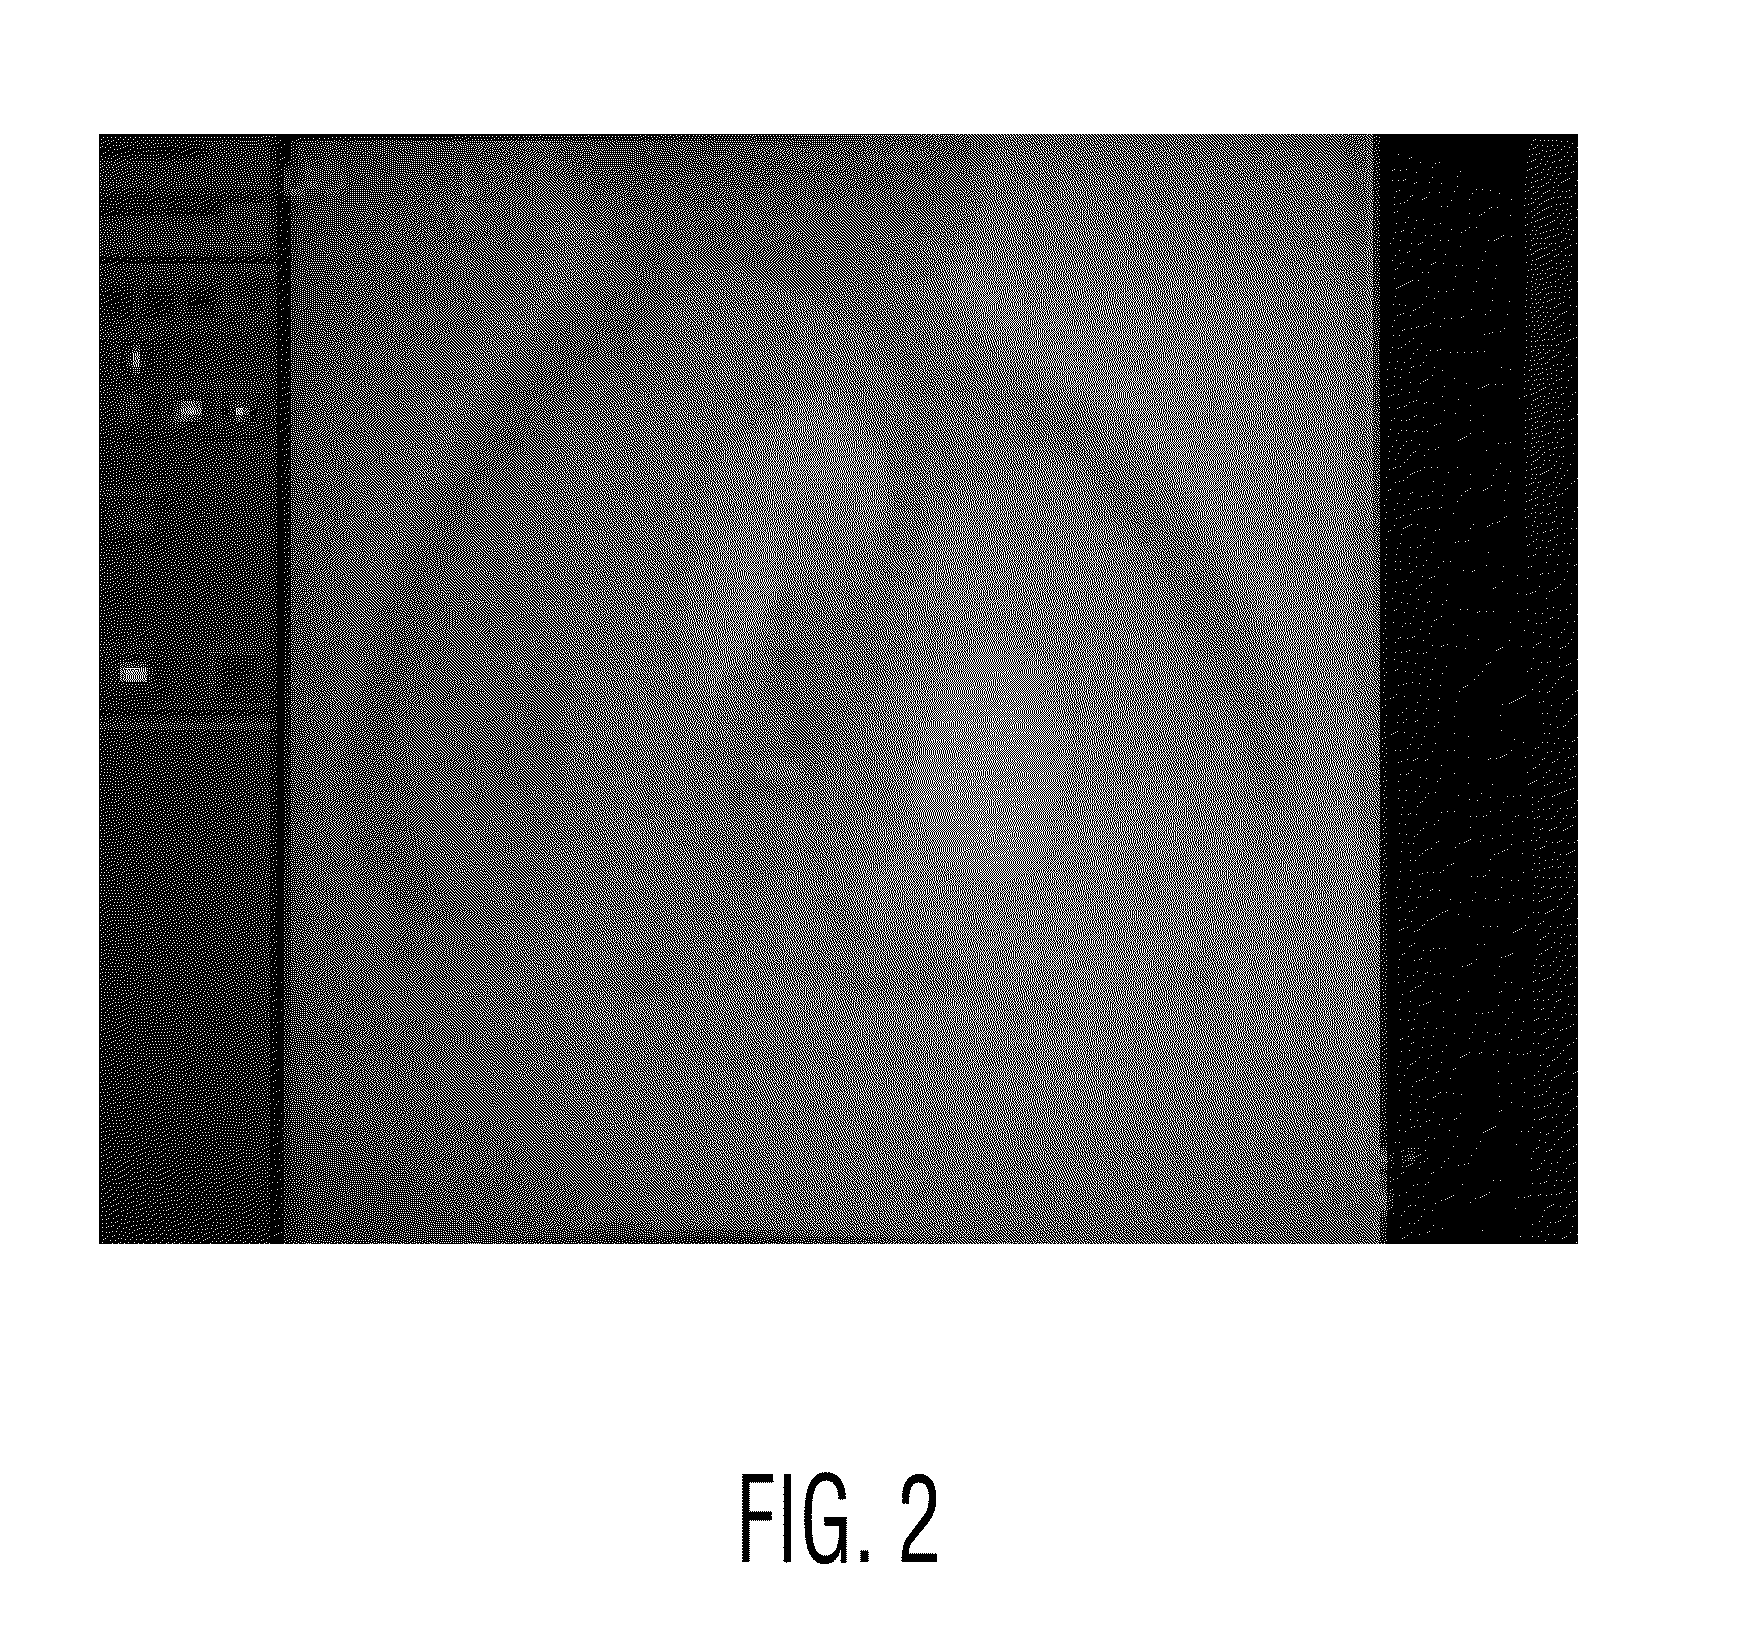 Anatomically and functionally accurate soft tissue phantoms and method for generating same